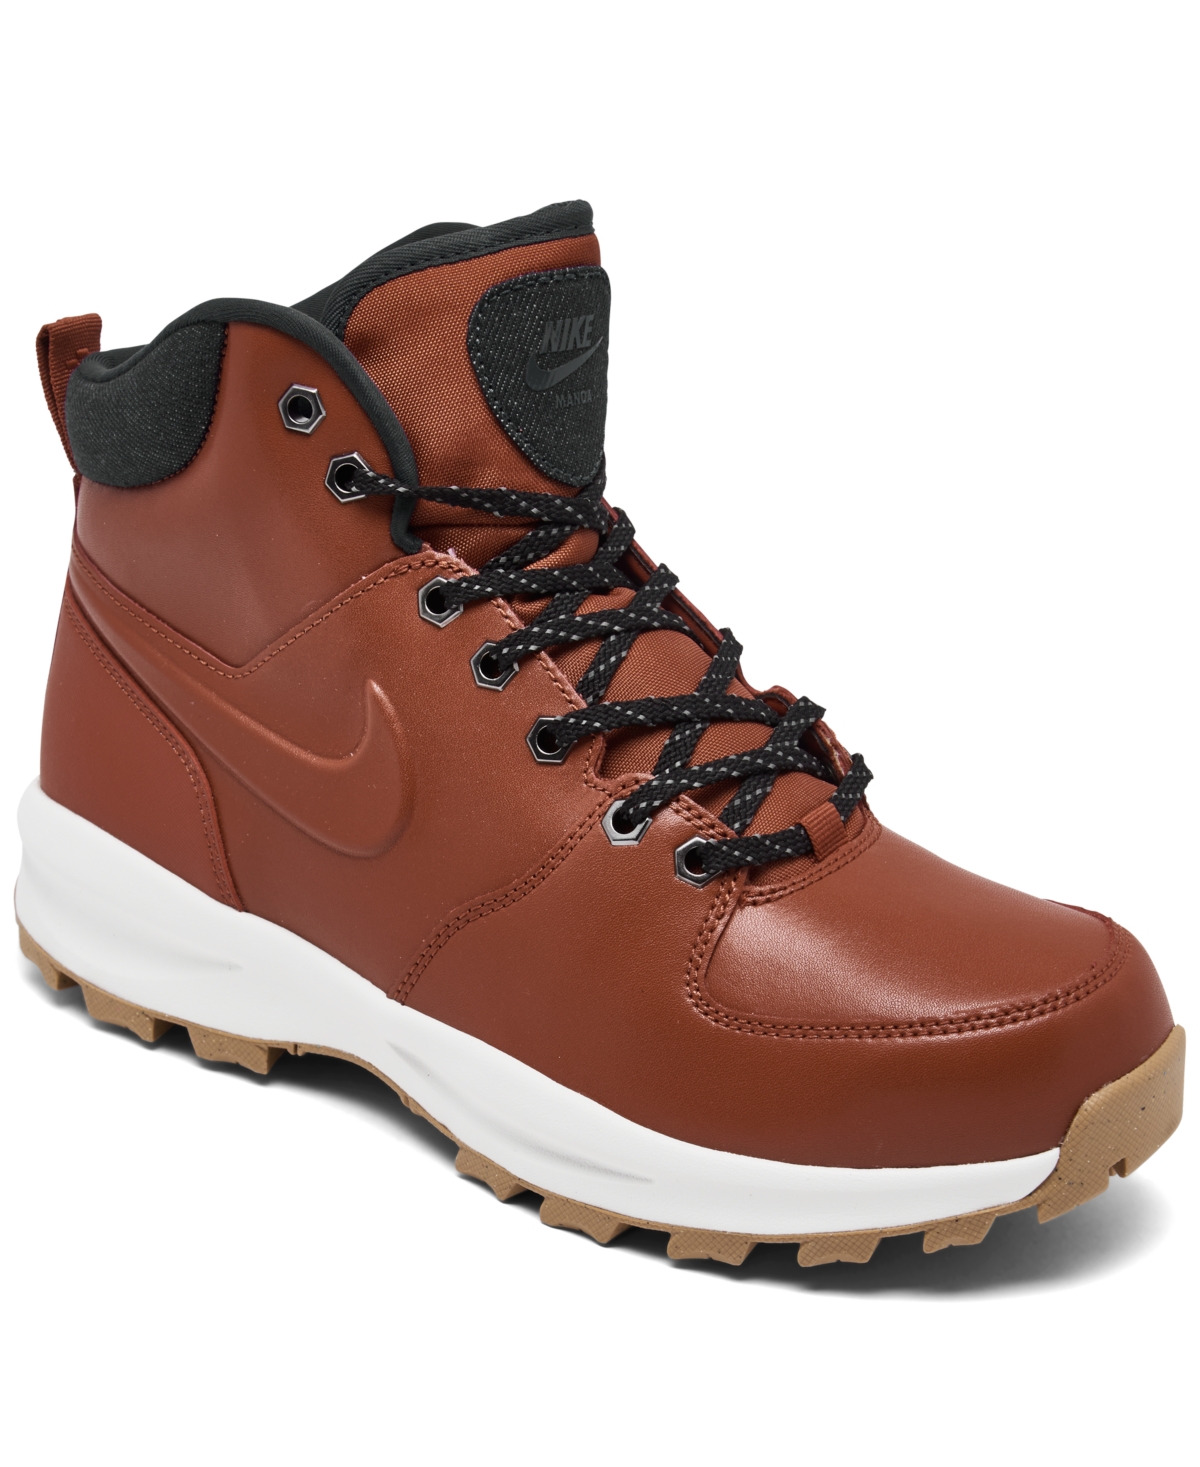 Nike Men's Manoa Leather Boots from Finish Line | Smart Closet